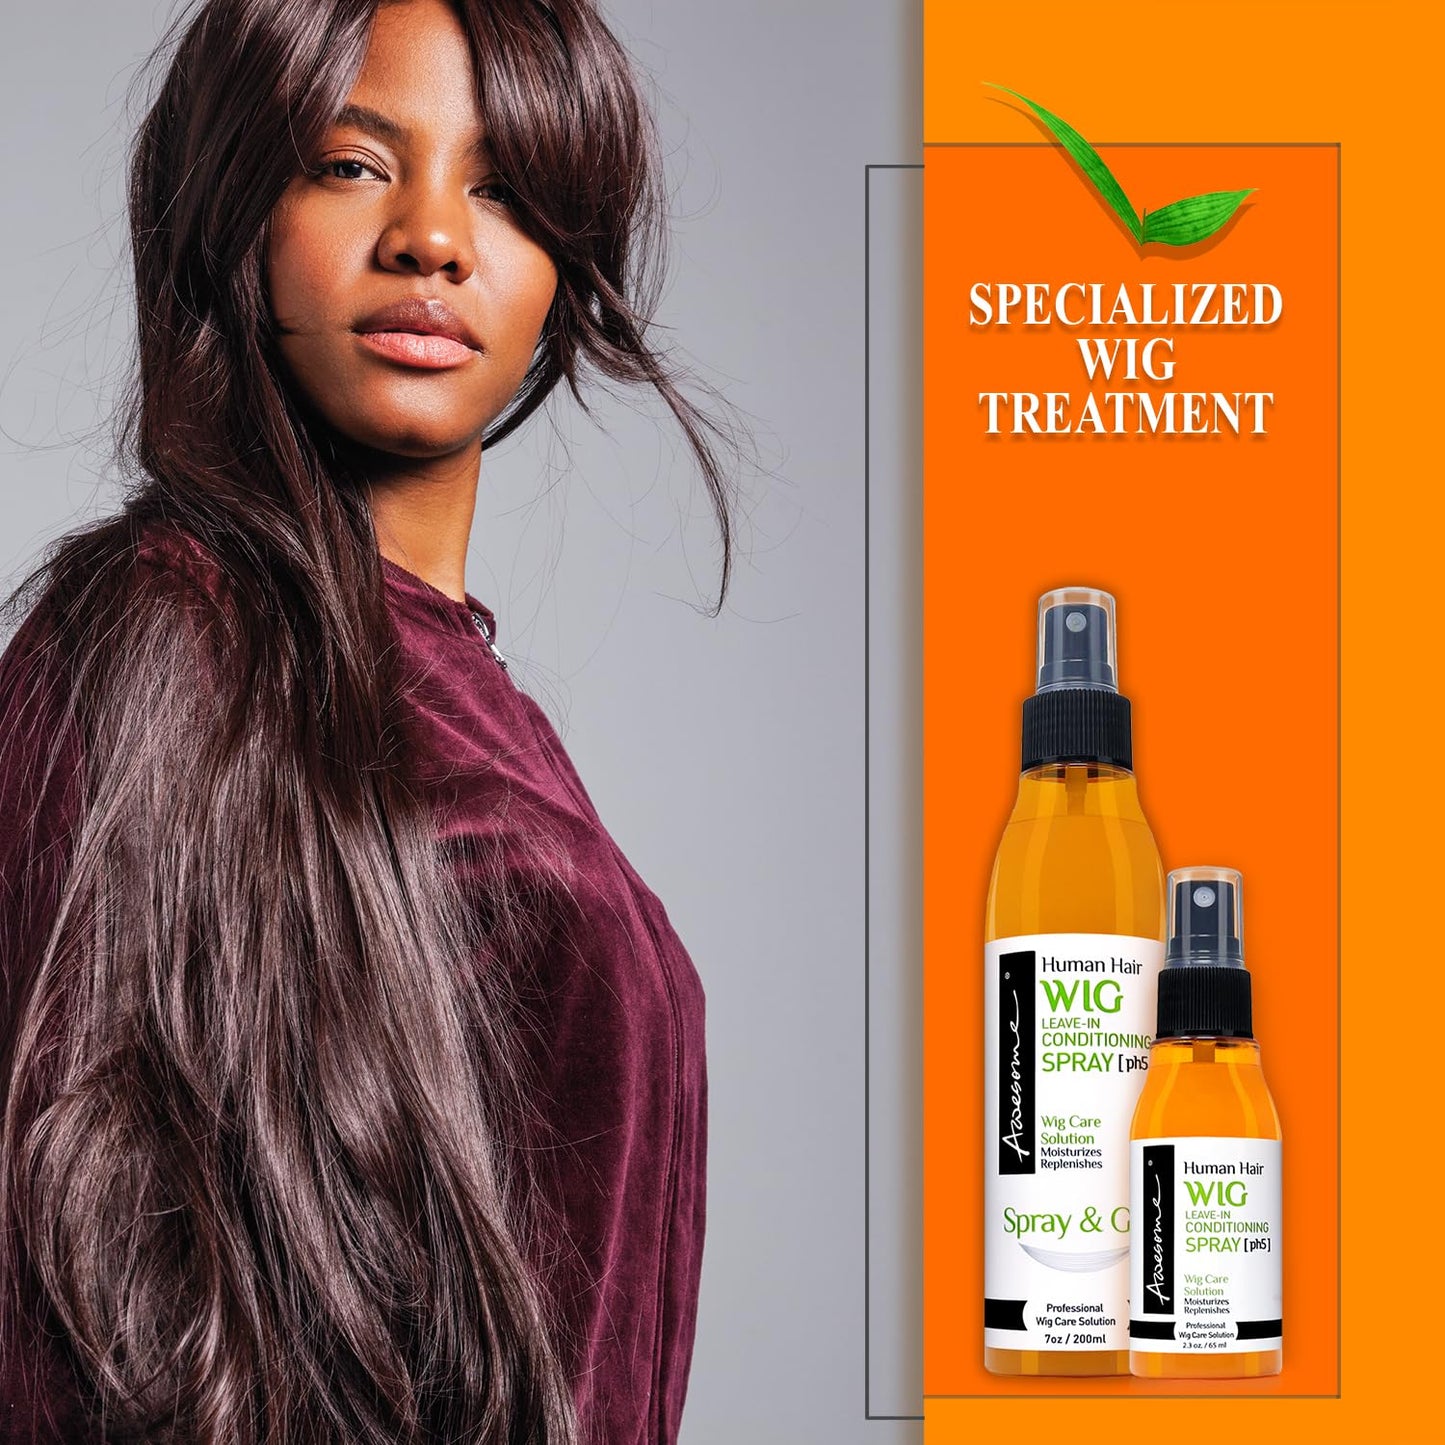 Awesome Human Hair Wig Leave in Conditioner Spray, pH5, Promotes Silkiness and Shine, Portable & Travel size 2.3 fl oz